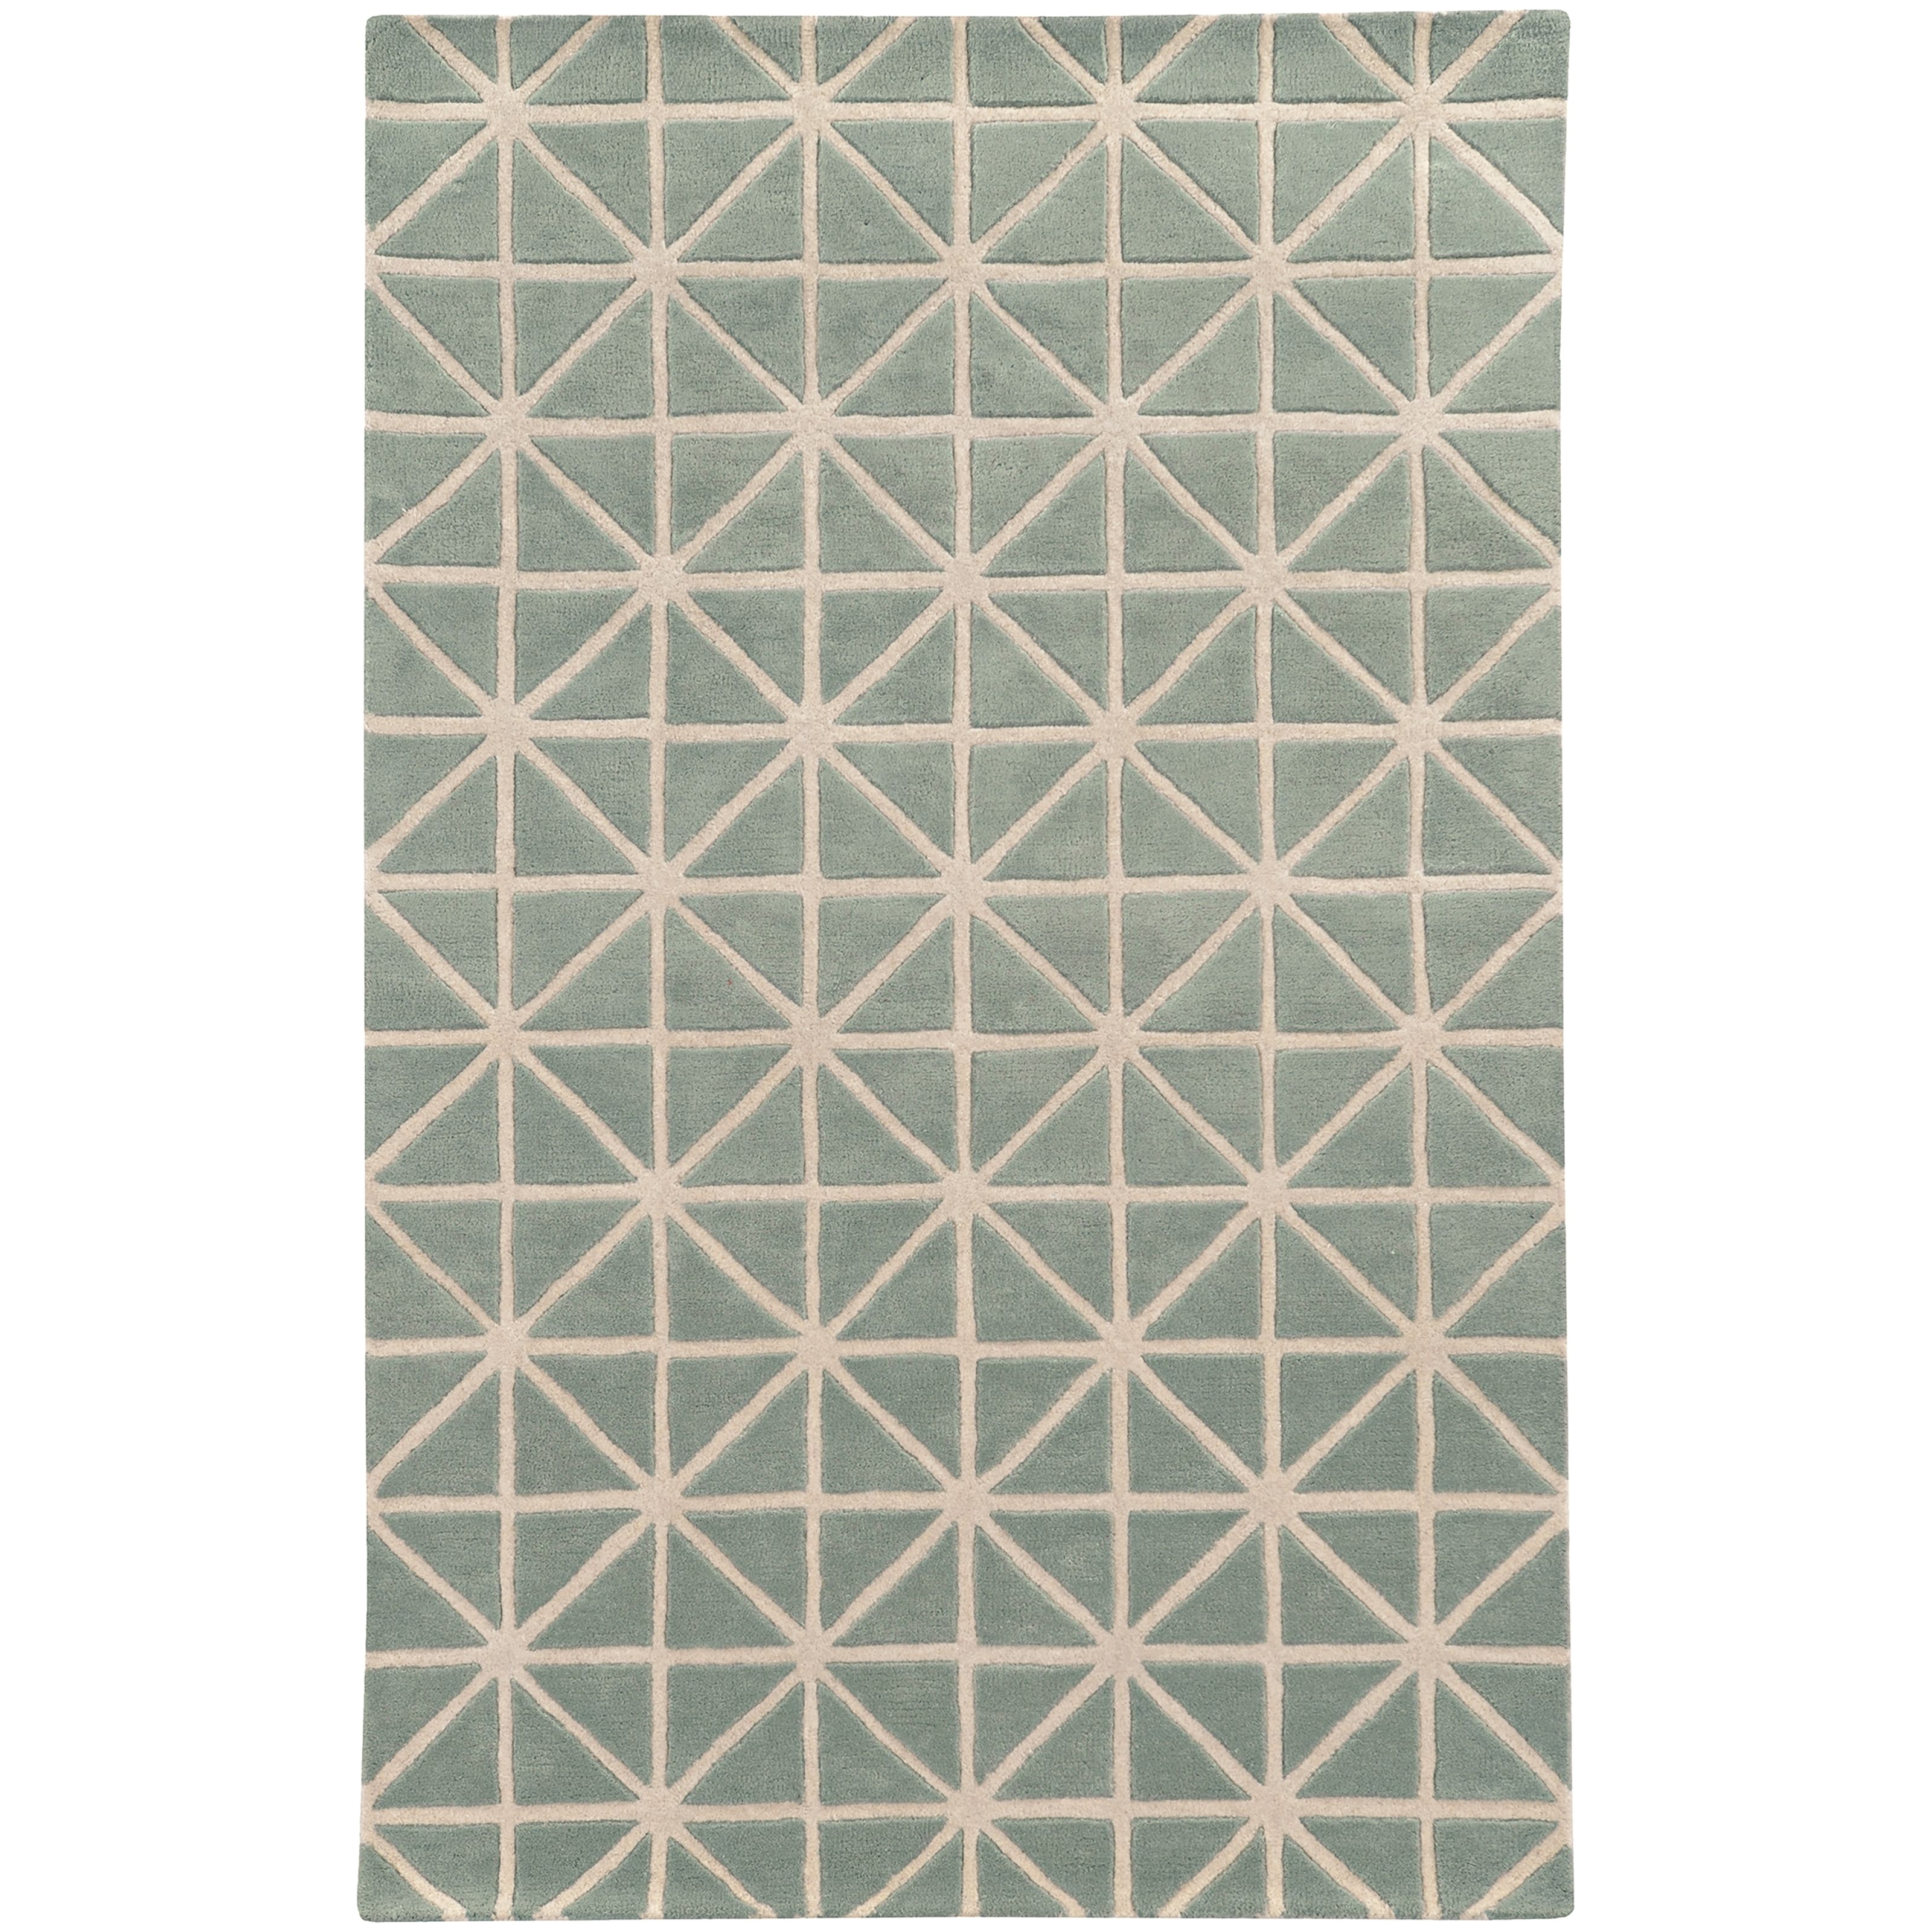 pantone universe hand crafted wool triangle grid work grey ivory rug 10 x 13 10 x 13 size 10 x 13